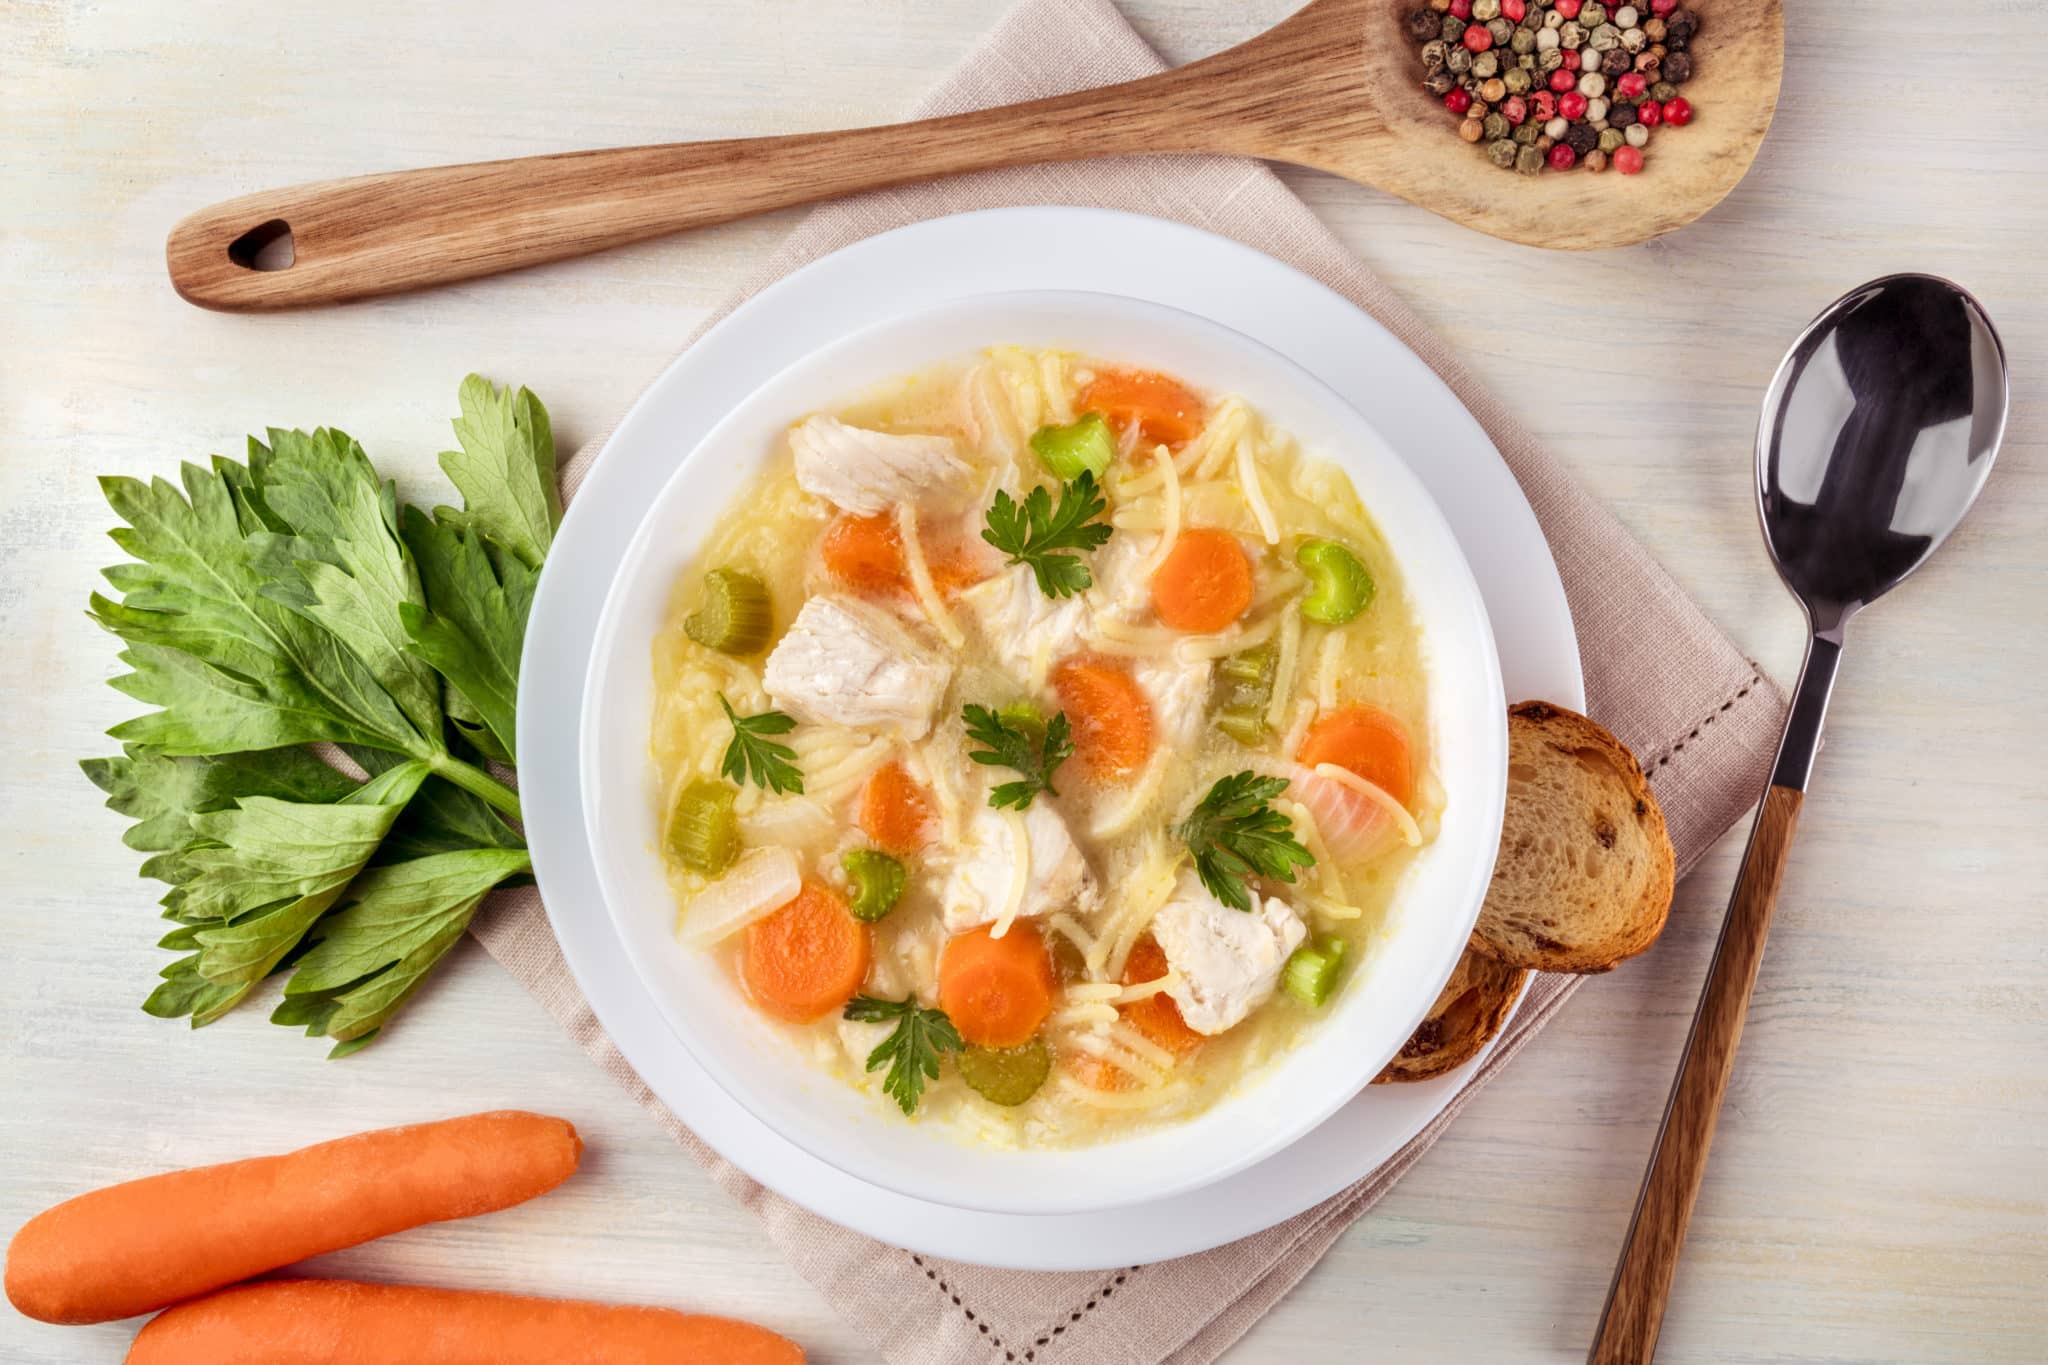 Bowl of chicken soup with vegetables on table with large carrots and wooden spoon